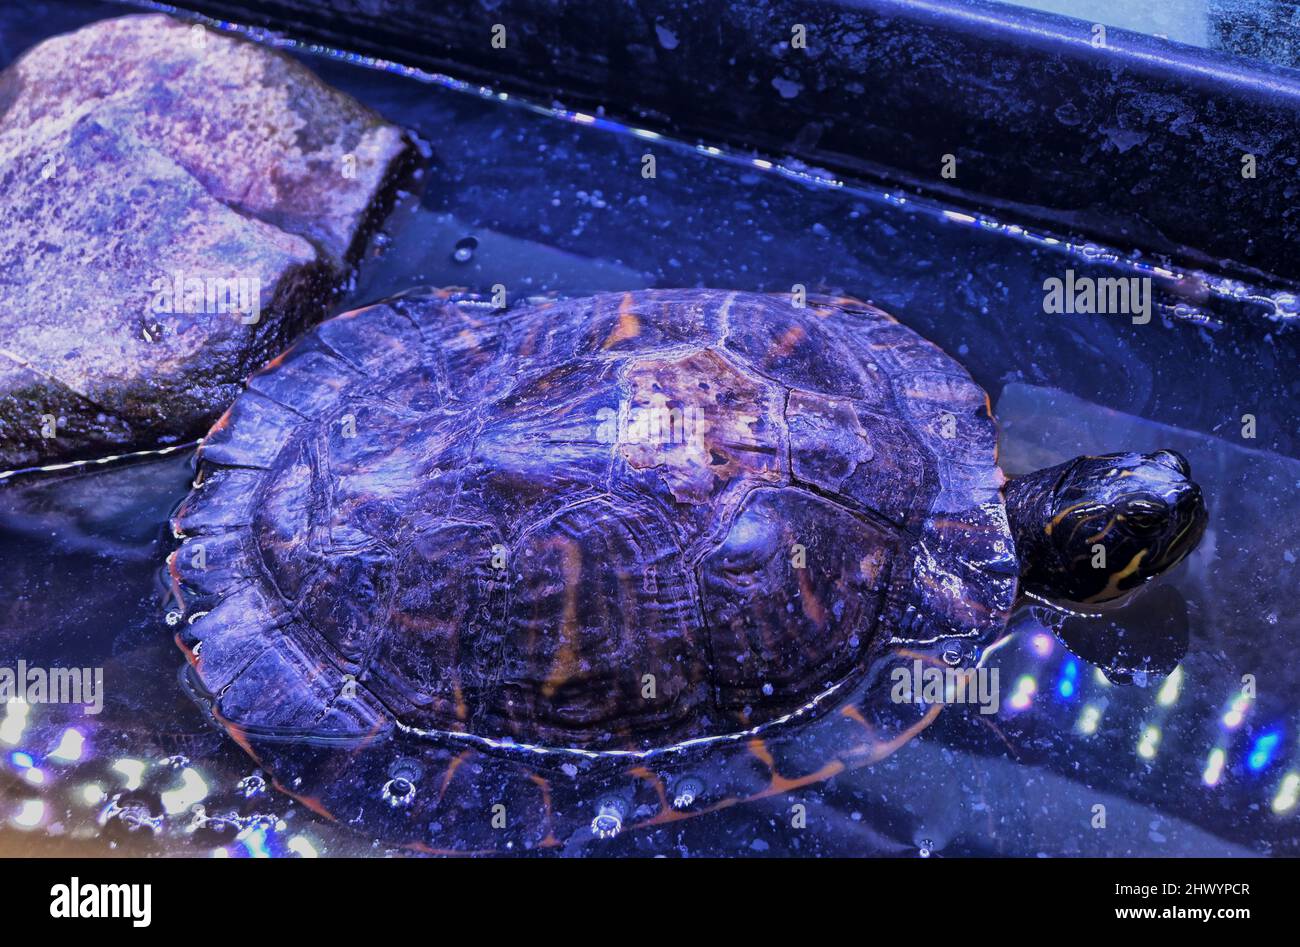 North american yellow bellied slider, turtle, england Stock Photo